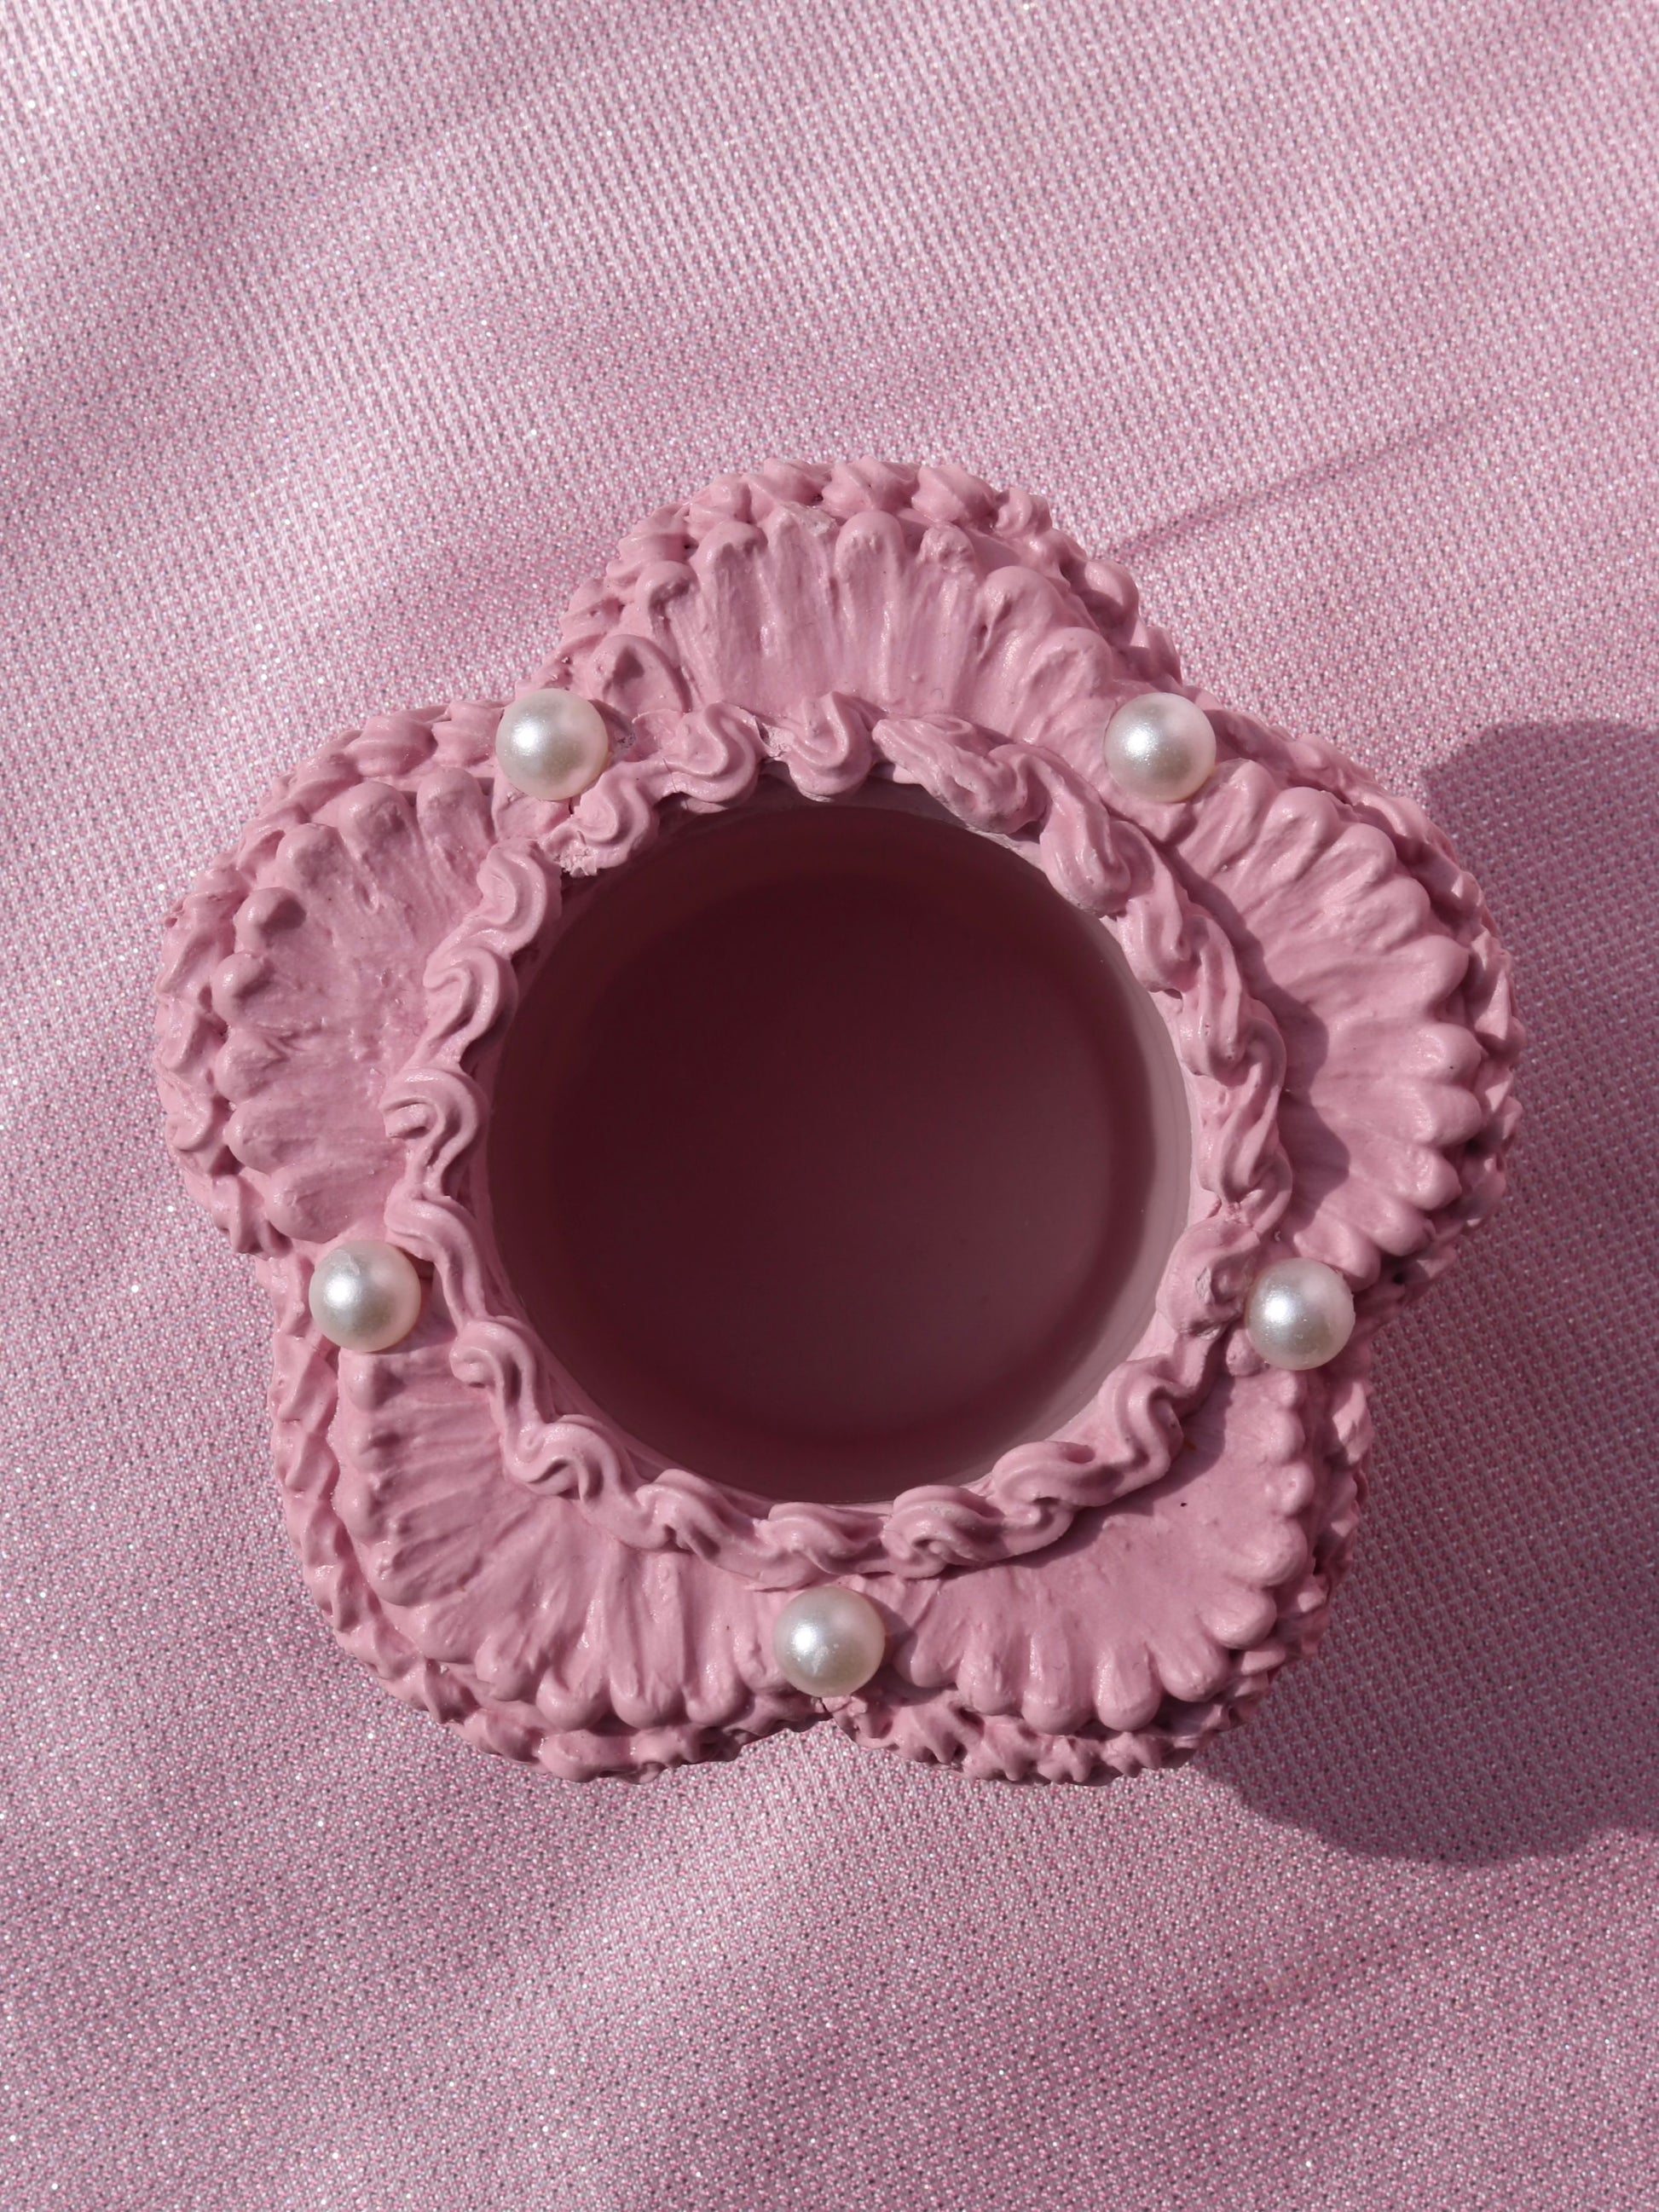 a flower shaped candle holder decorated to look like a pink cake with pearl details